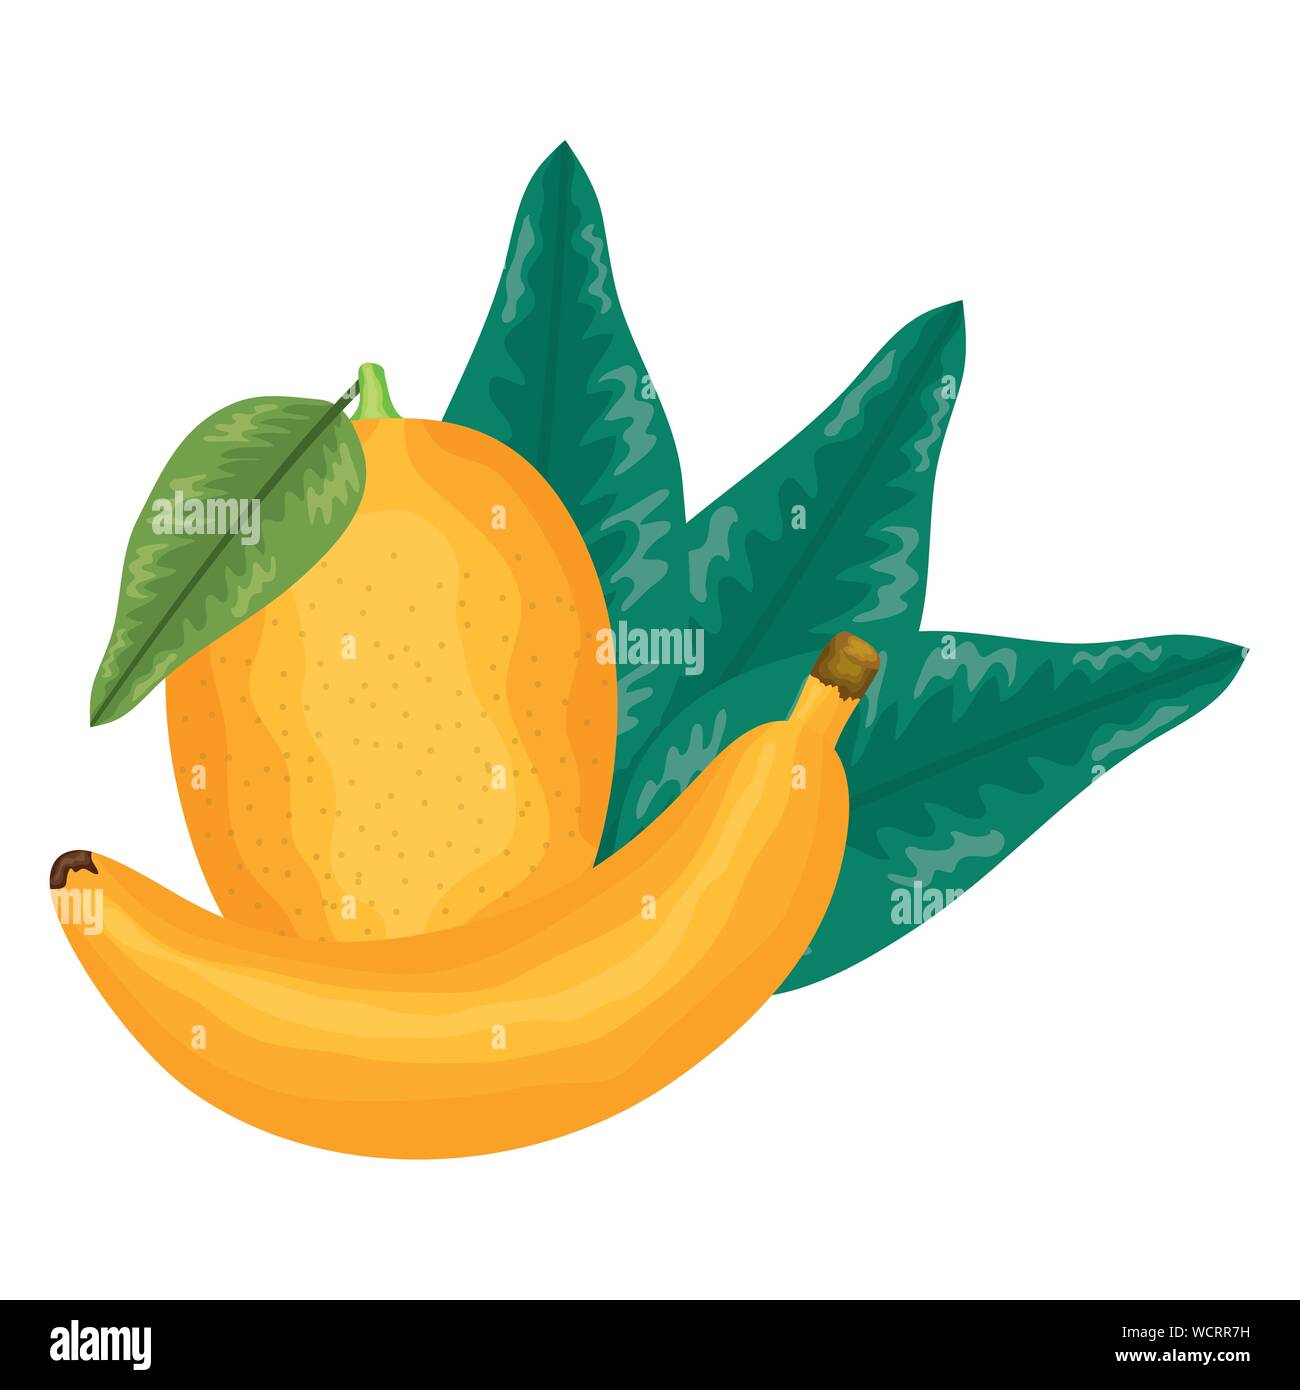 Image Details INH_18984_25763 - Bunch of fresh and ripe banana fruits retro  badge, bordered with header Organic Farm, ribbon banner, stars and green  leaves. Banana fruits icon for greengrocery symbol or food